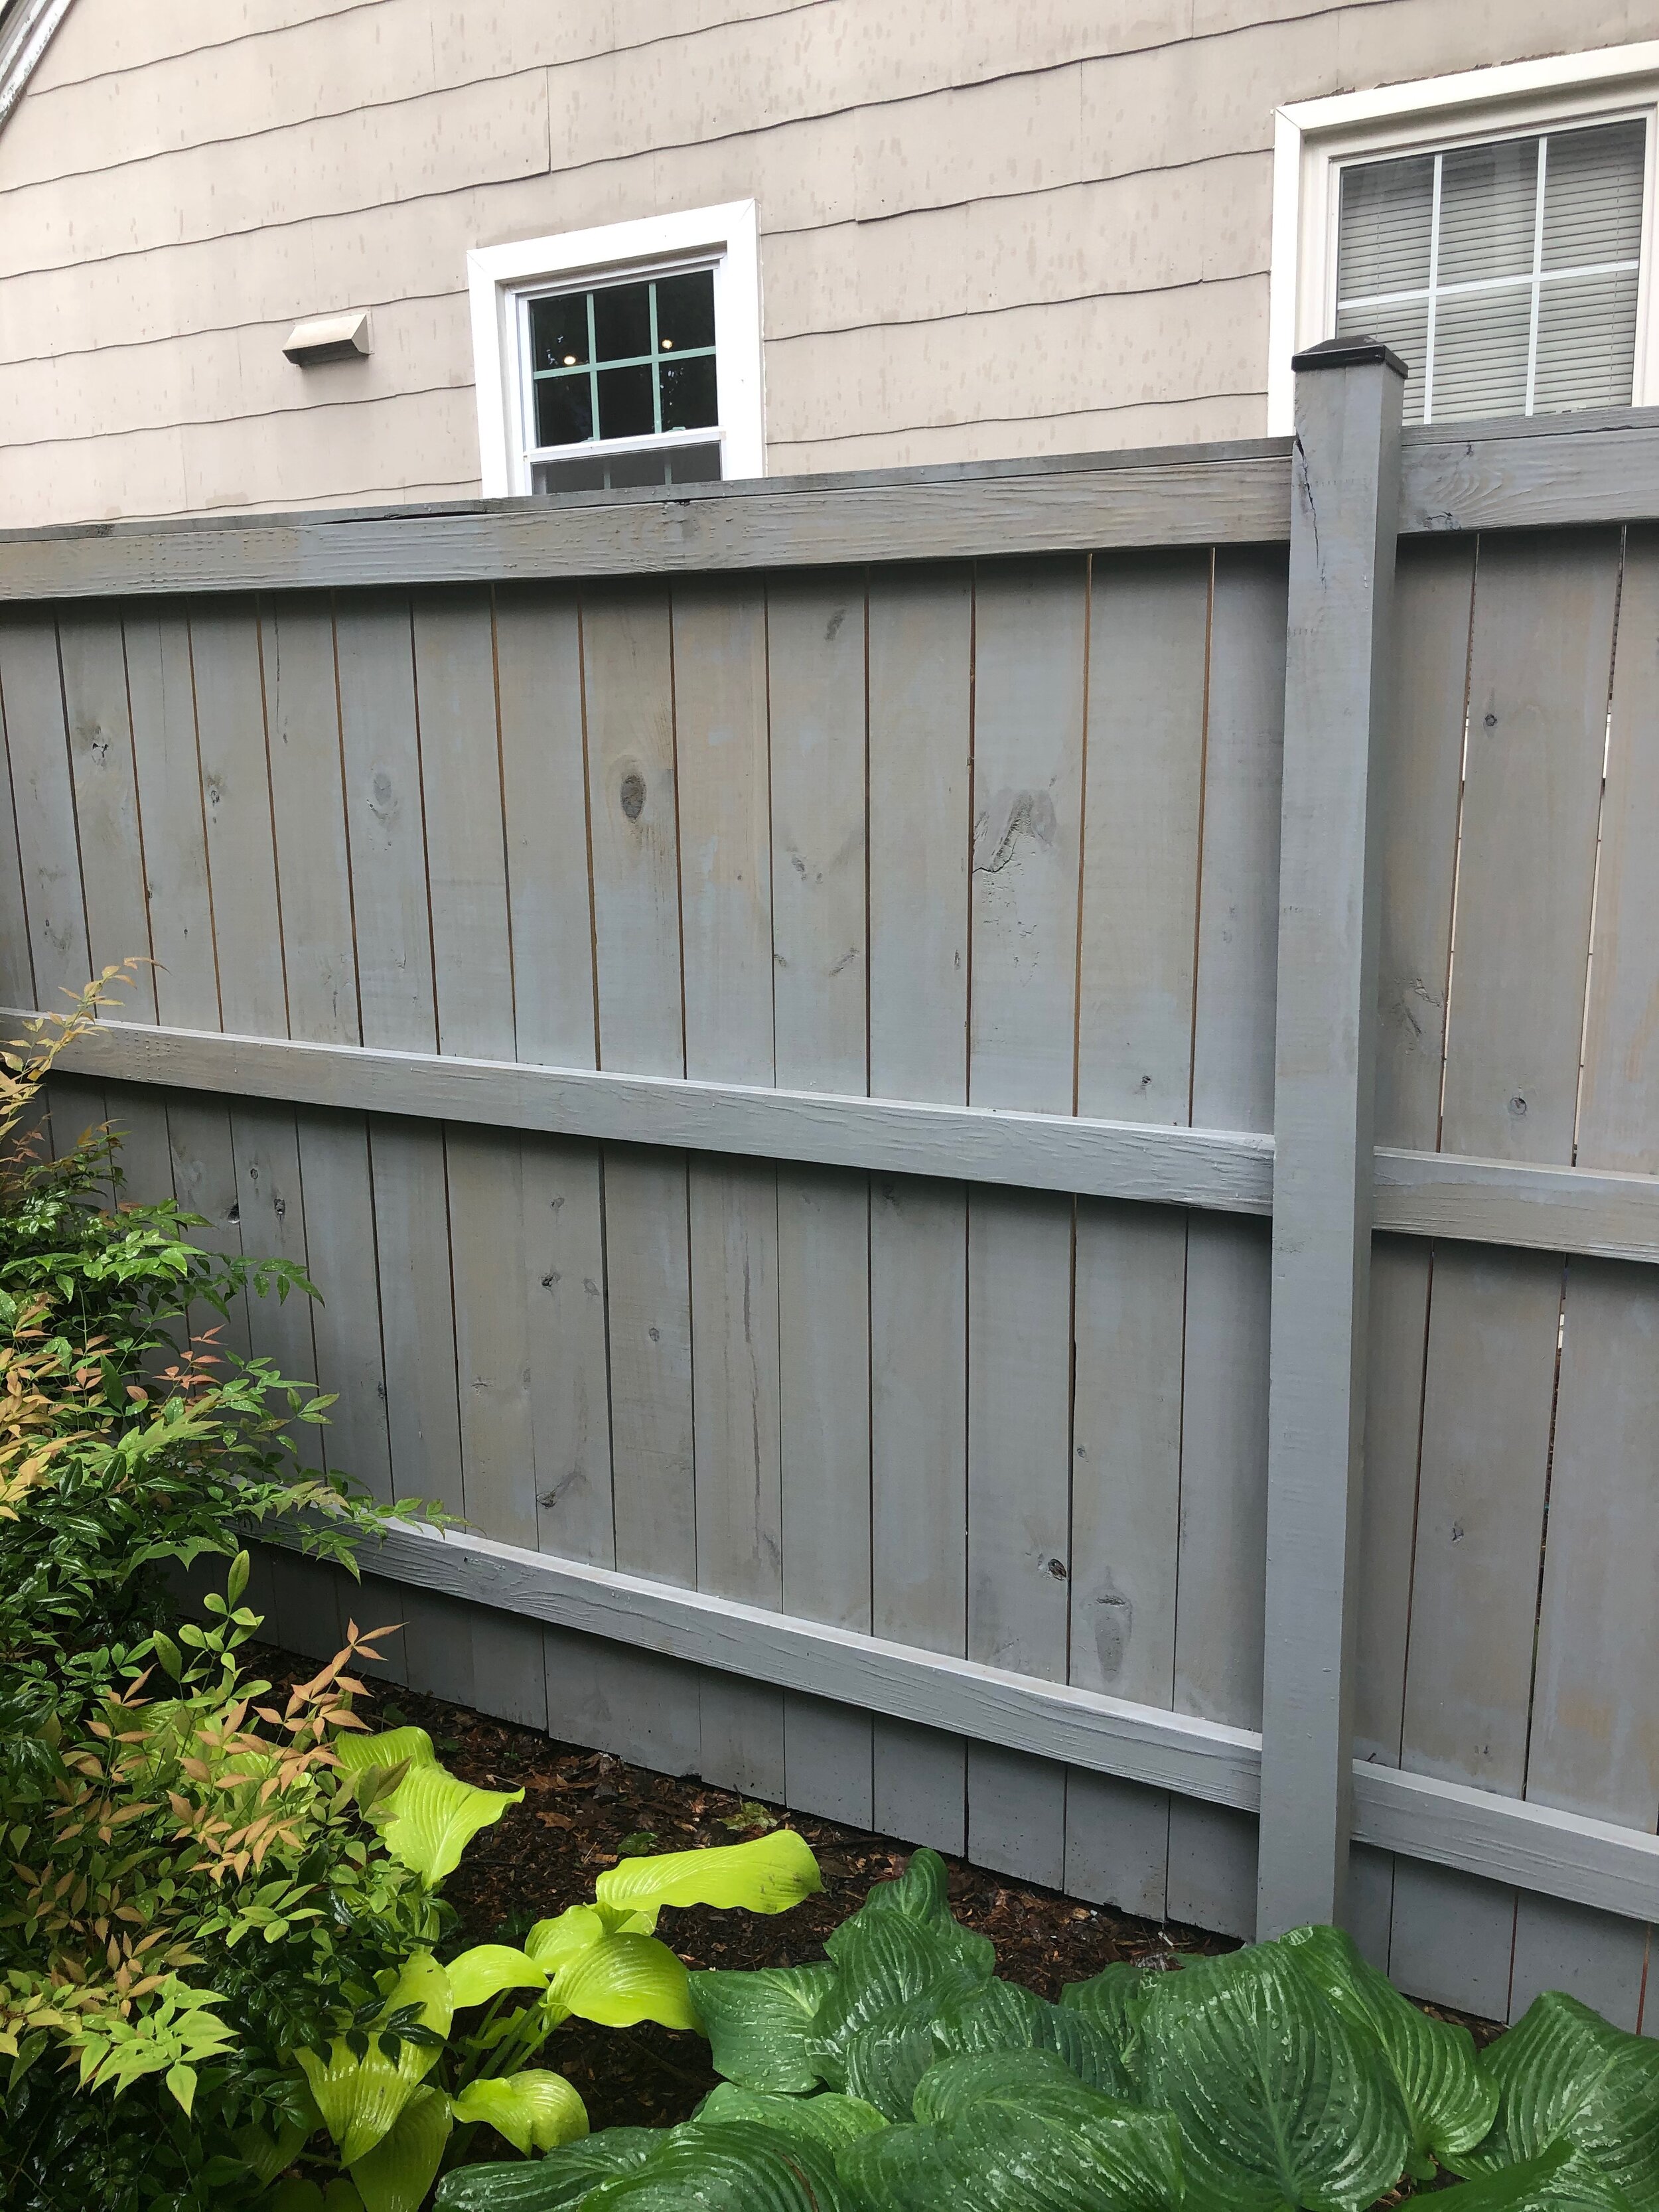 Newly Stained Fence